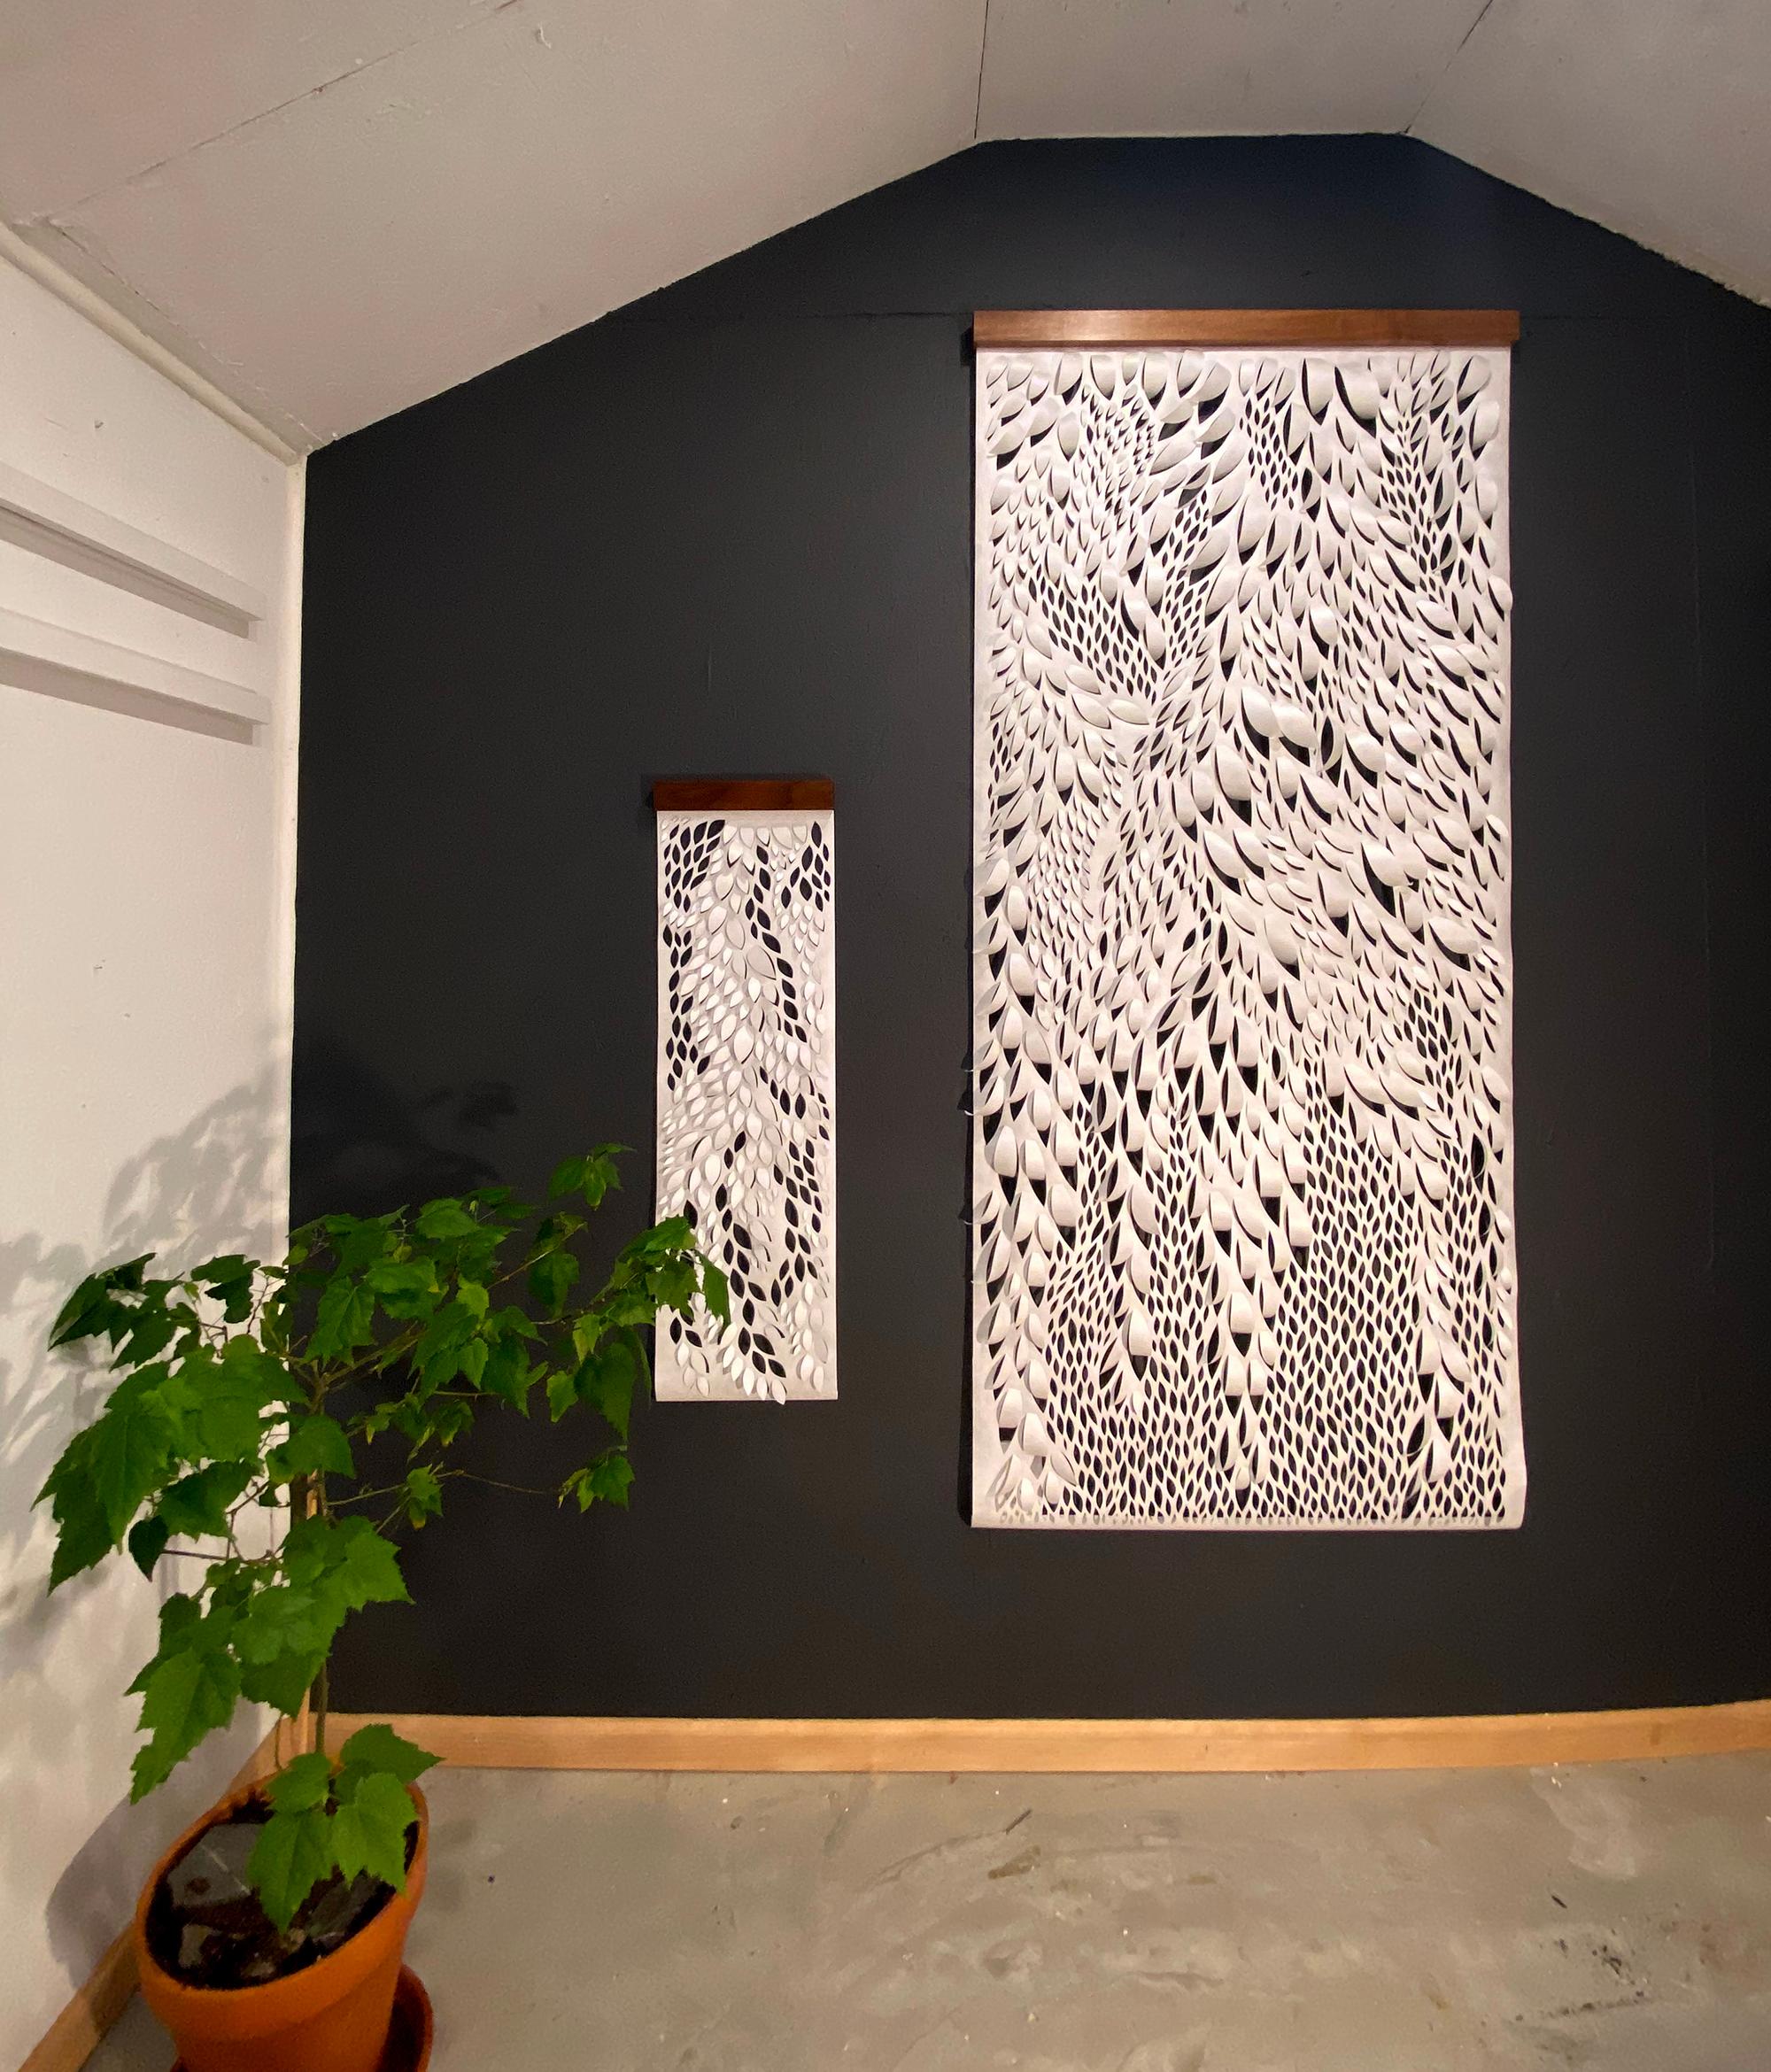 White organic, leaf like shapes create a fluid hanging natural sculpture.  Each wall hanging is hand-cut (not laser) out of Tyvek, a synthetic paper that is incredibly durable. These pieces are dust, water, mildew, and tear resistant. The hangers